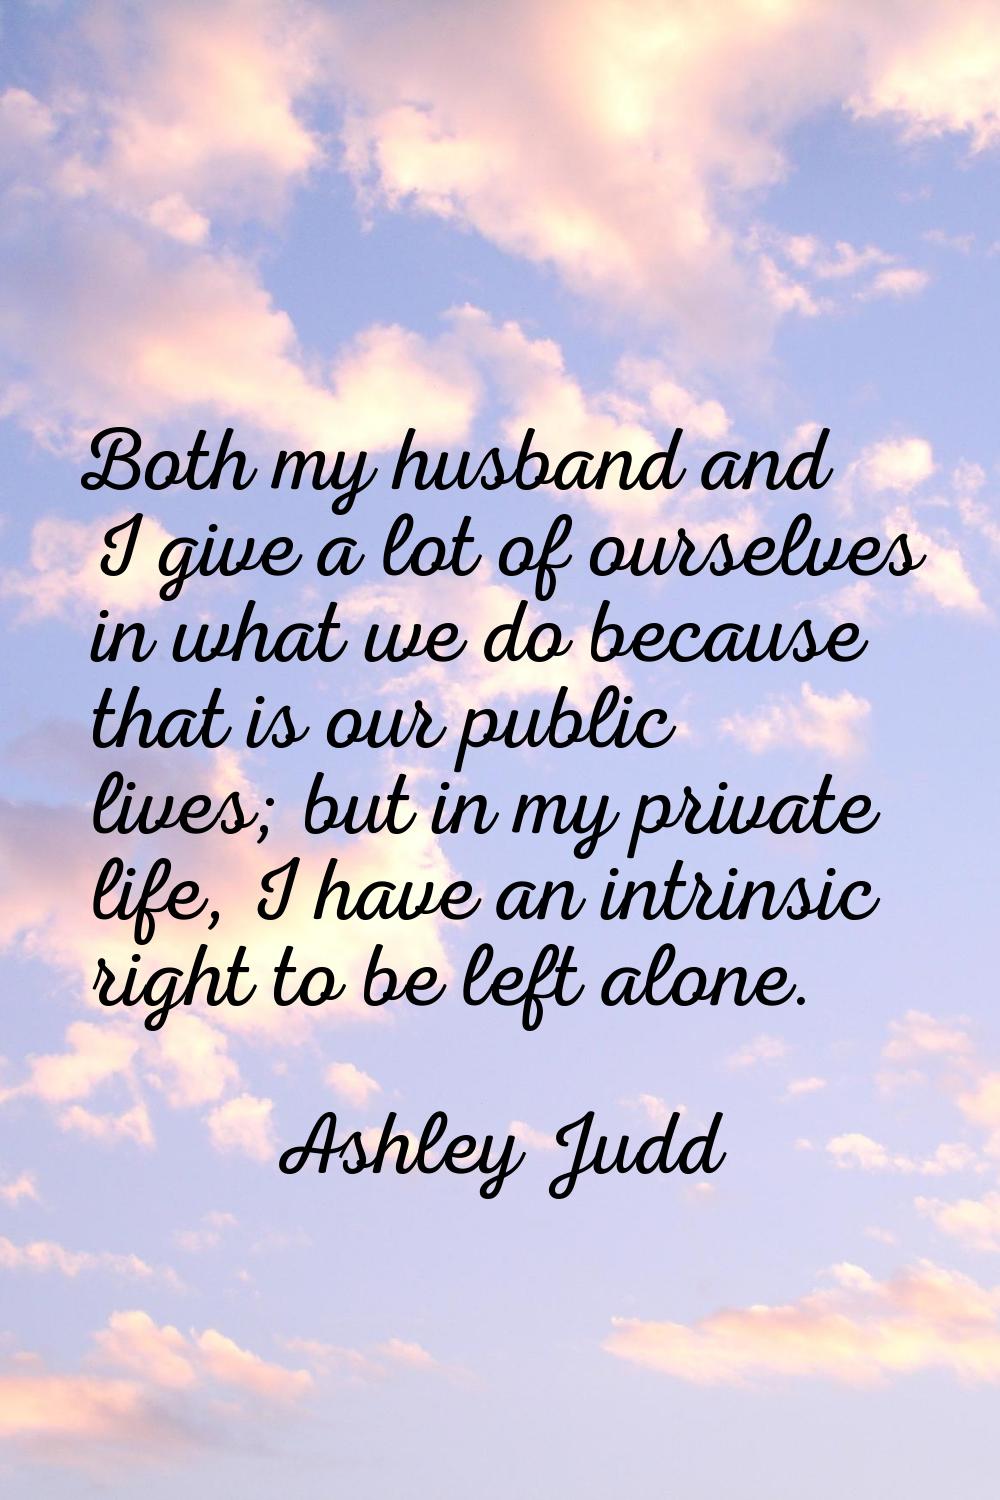 Both my husband and I give a lot of ourselves in what we do because that is our public lives; but i